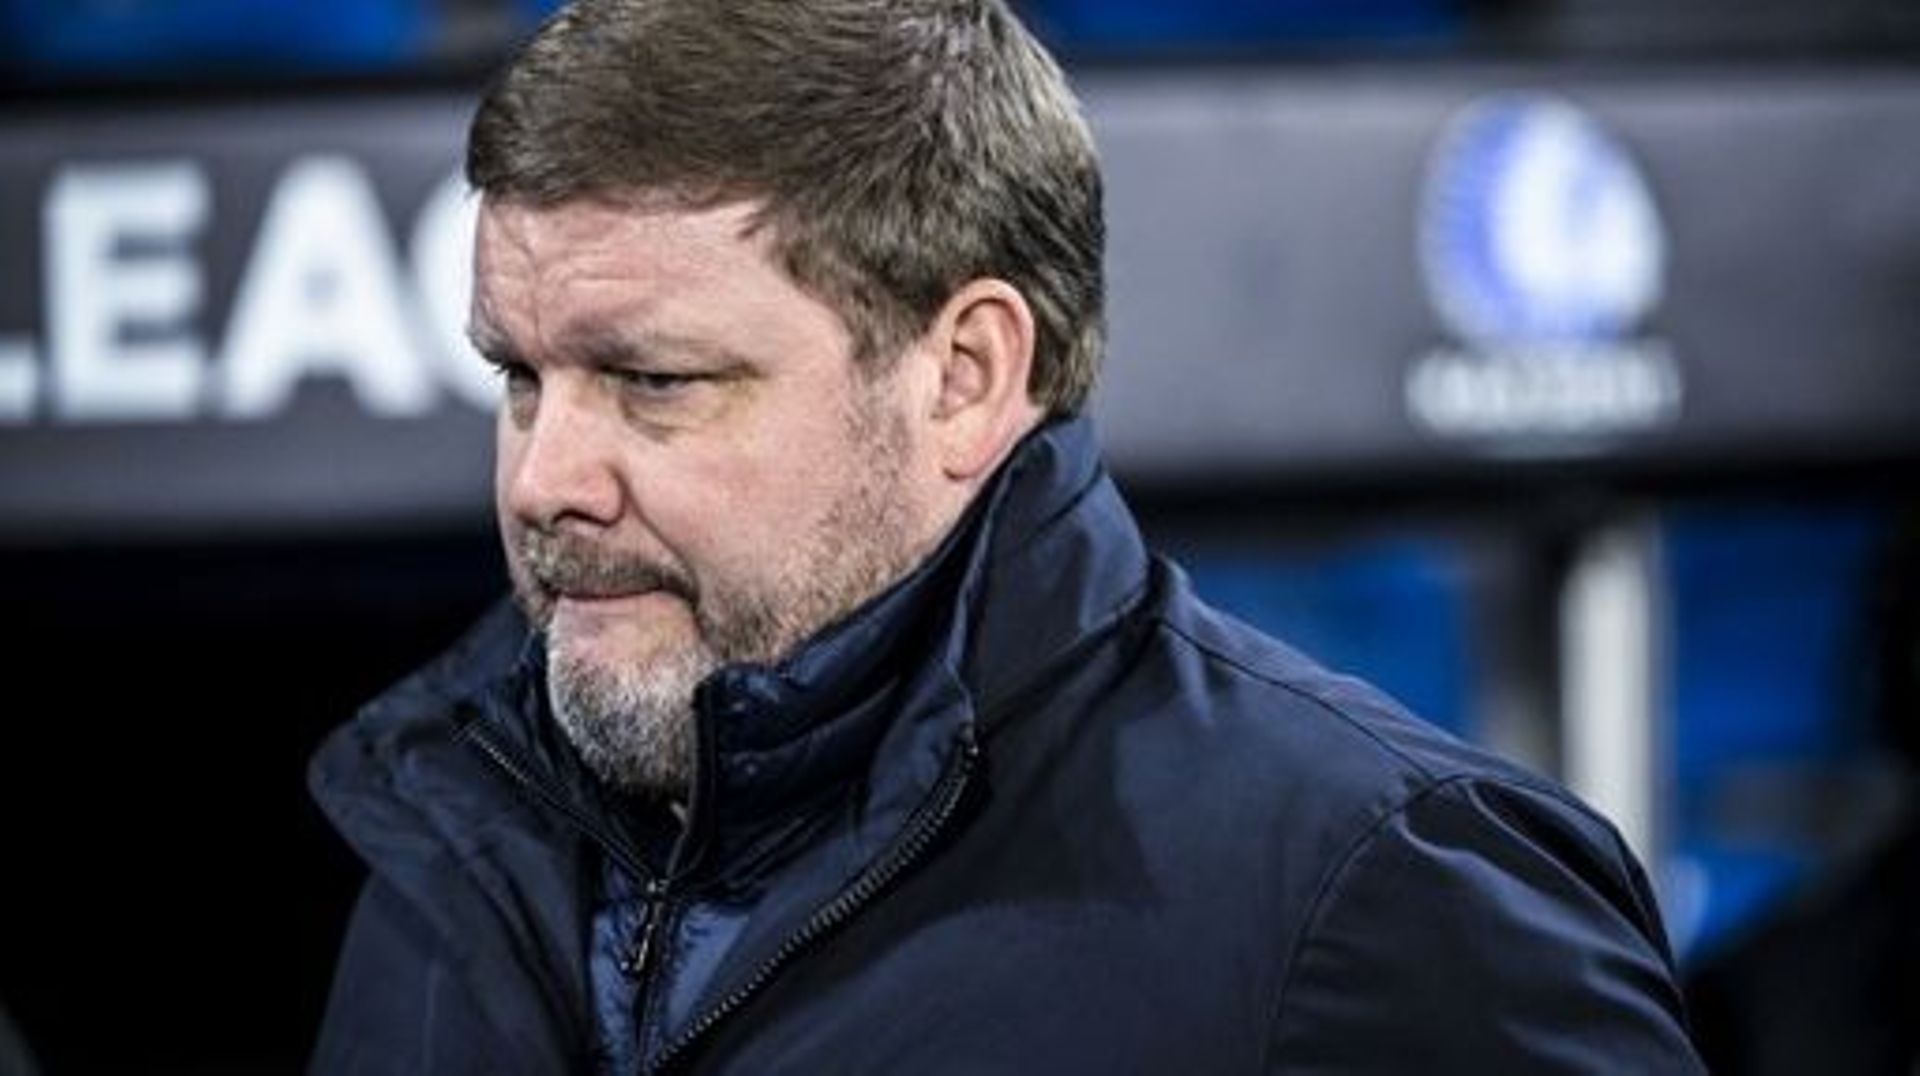 Gent’s head coach Hein Vanhaezebrouck pictured before a soccer game between Turkish Istanbul Basaksehir FK and Belgian KAA Gent on Wednesday 15 March 2023 in Istanbul, Turkey, the return leg of the round of 16 of the UEFA Europa Conference League competit